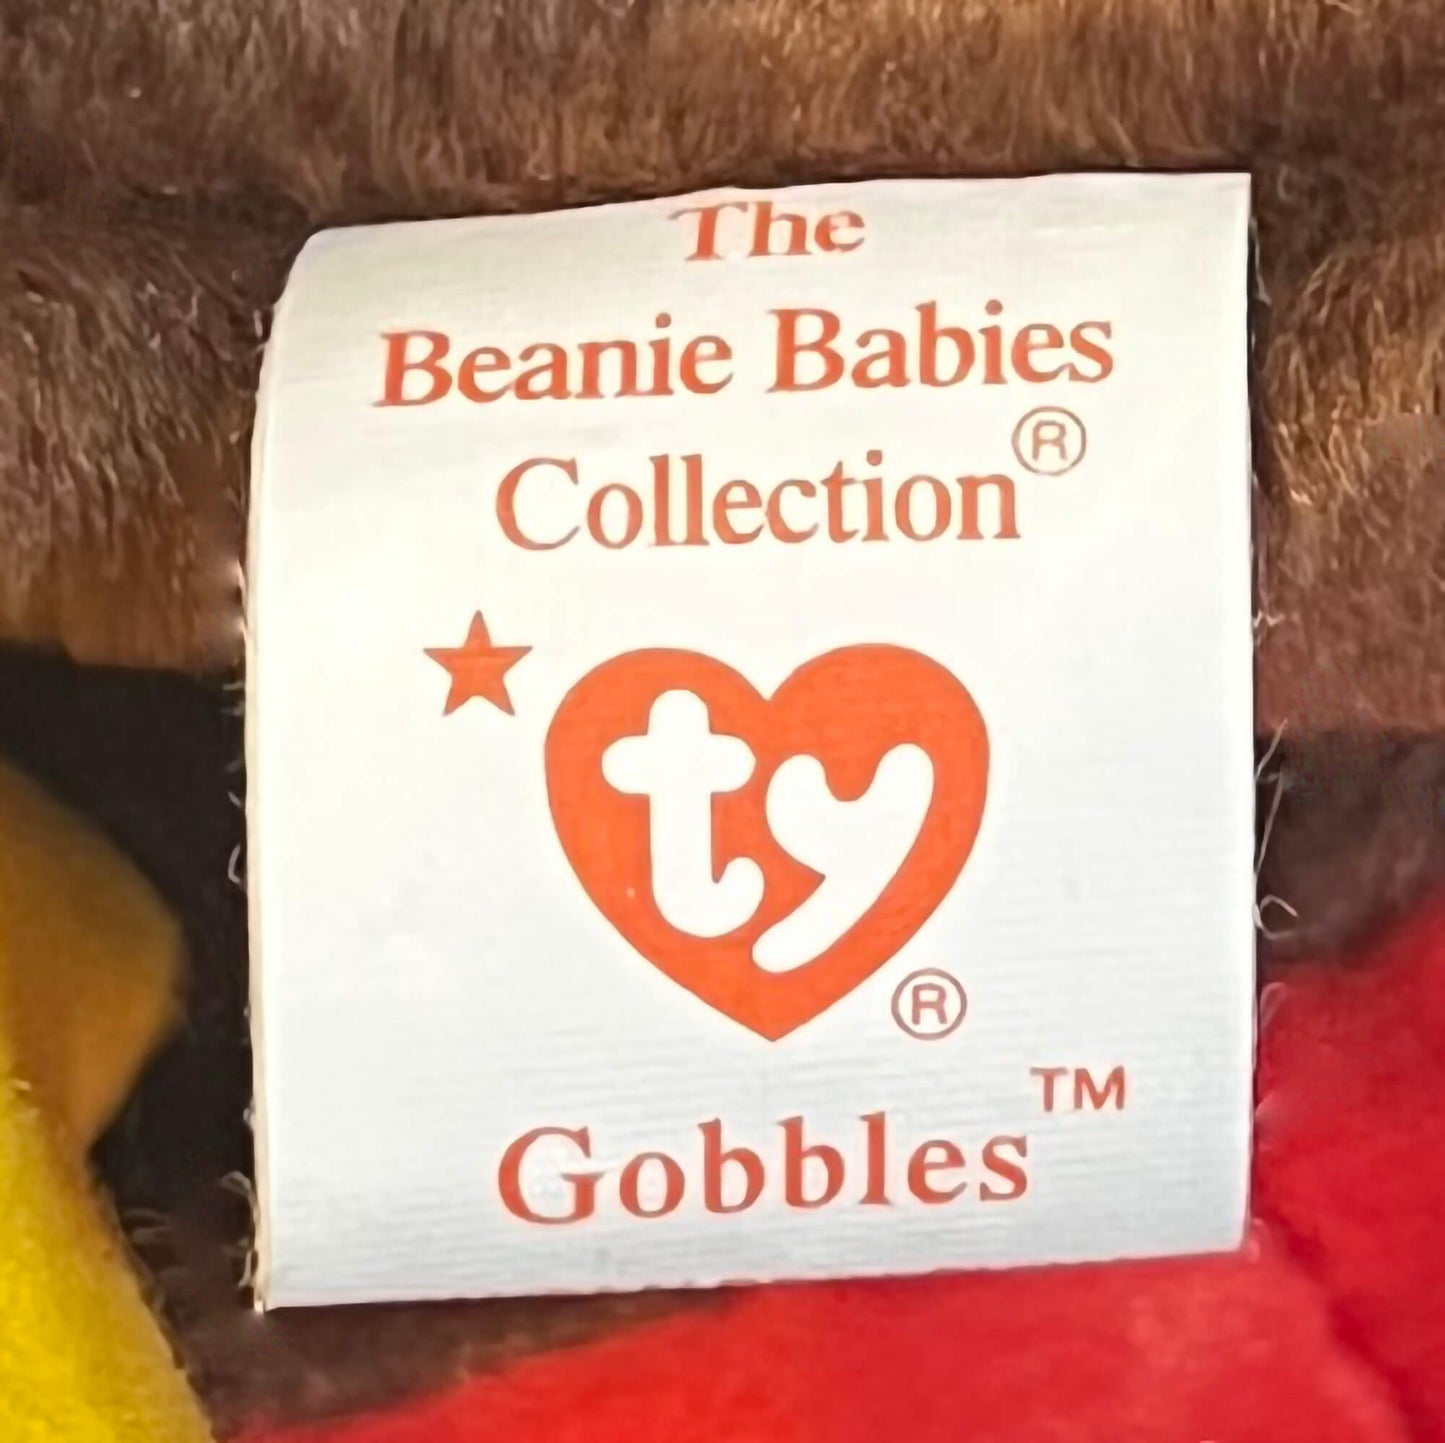 Ty-Beanie-Babies-Collection-Gobbles-Label.